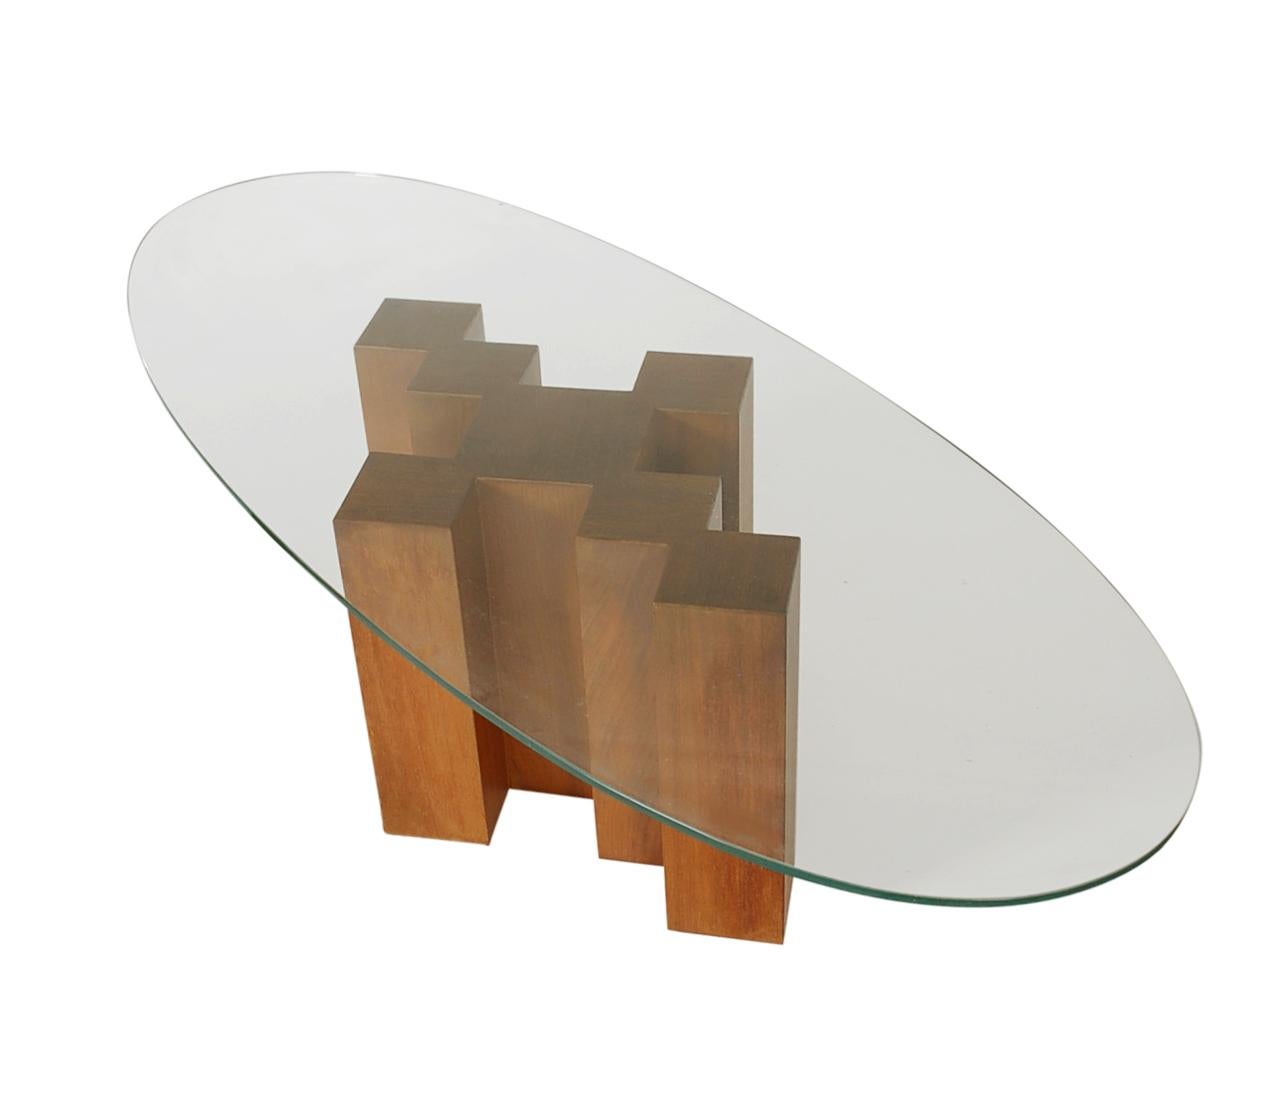 Mid-20th Century Midcentury Danish Modern Walnut and Oval Glass Cocktail Table in Art Deco Form For Sale